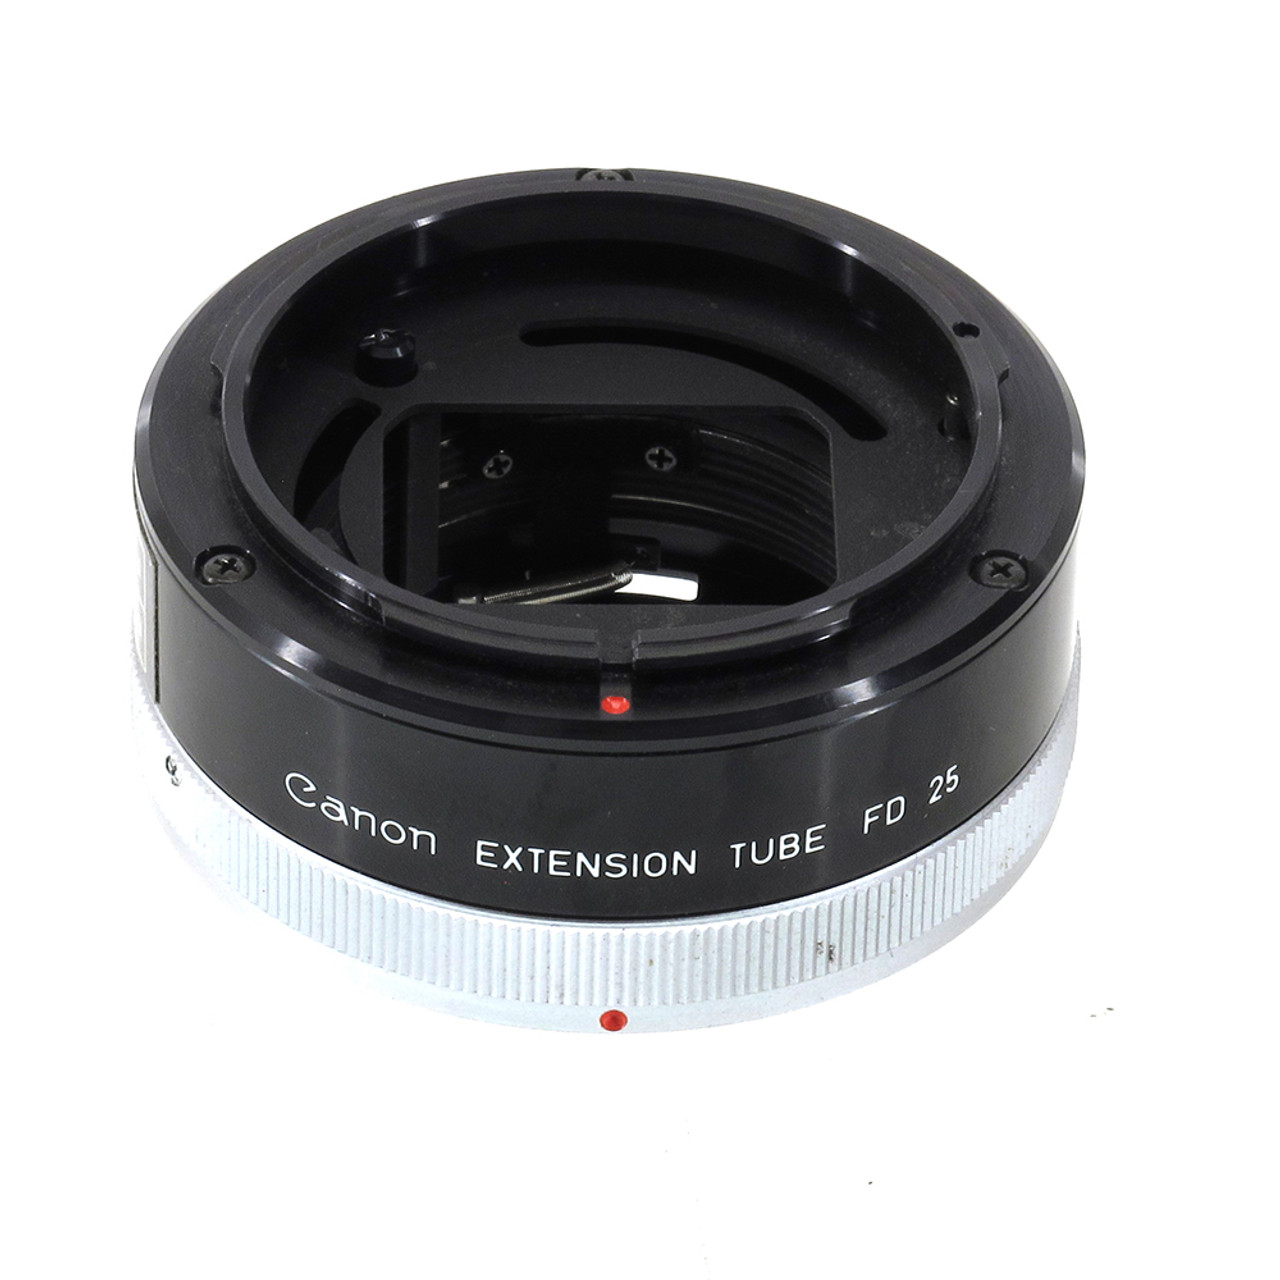 USED CANON FD EXTENSION TUBE 25 (746314)